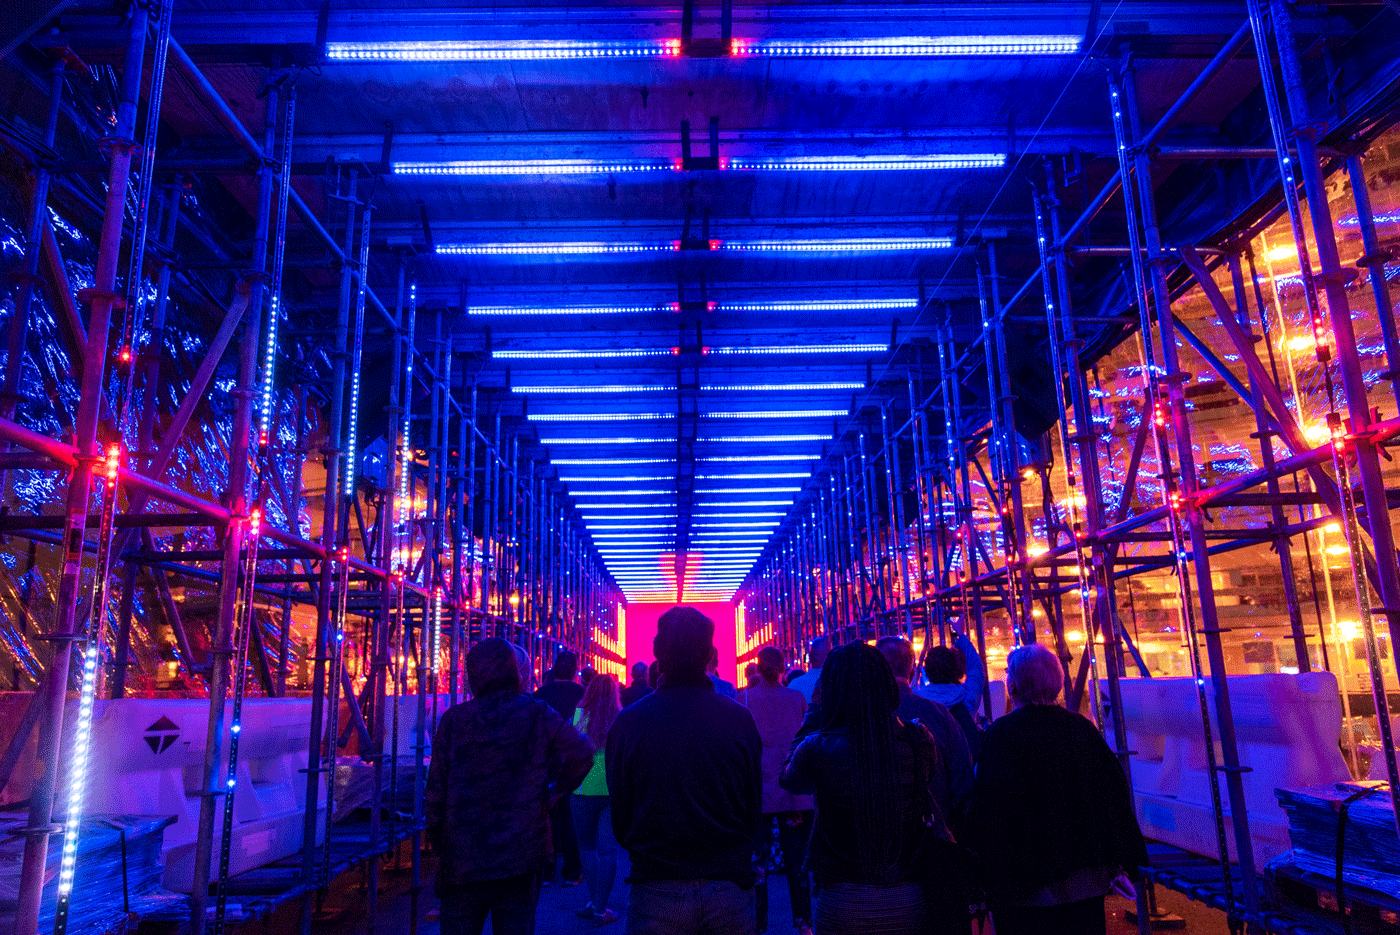 People stand together, looking up, in a tunnel of light